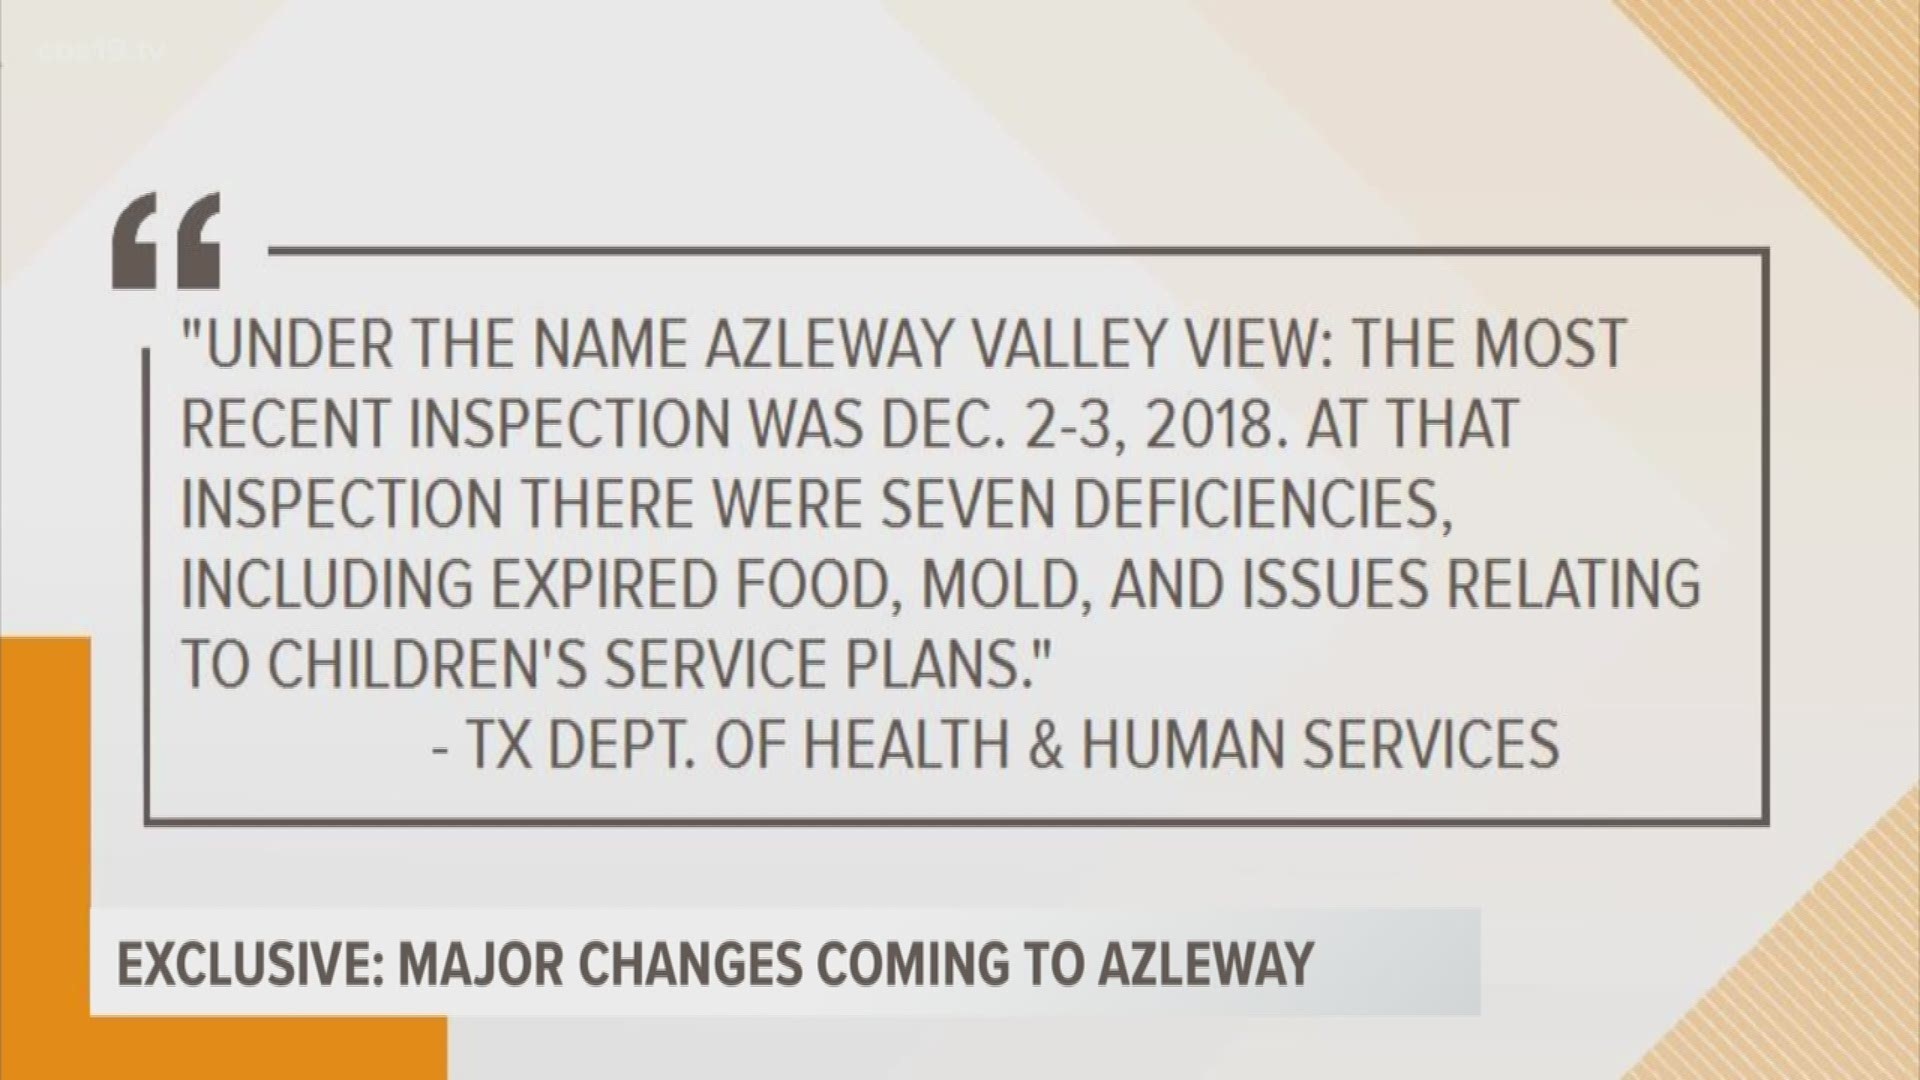 LaDryian Cole explains how major changes are coming to Azleway.